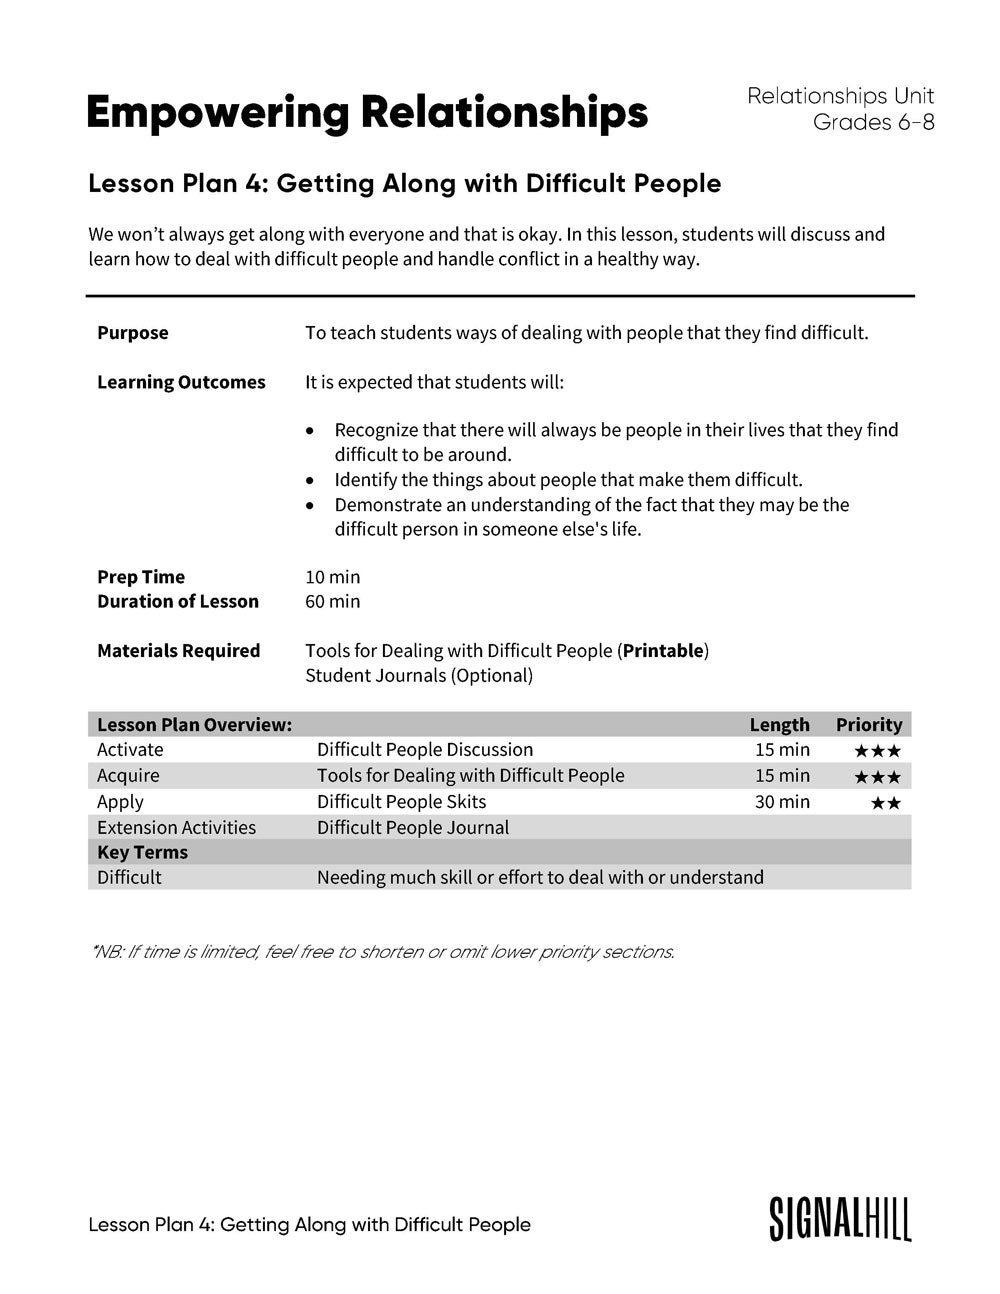 Lesson Plan 4: Getting Along with Difficult People